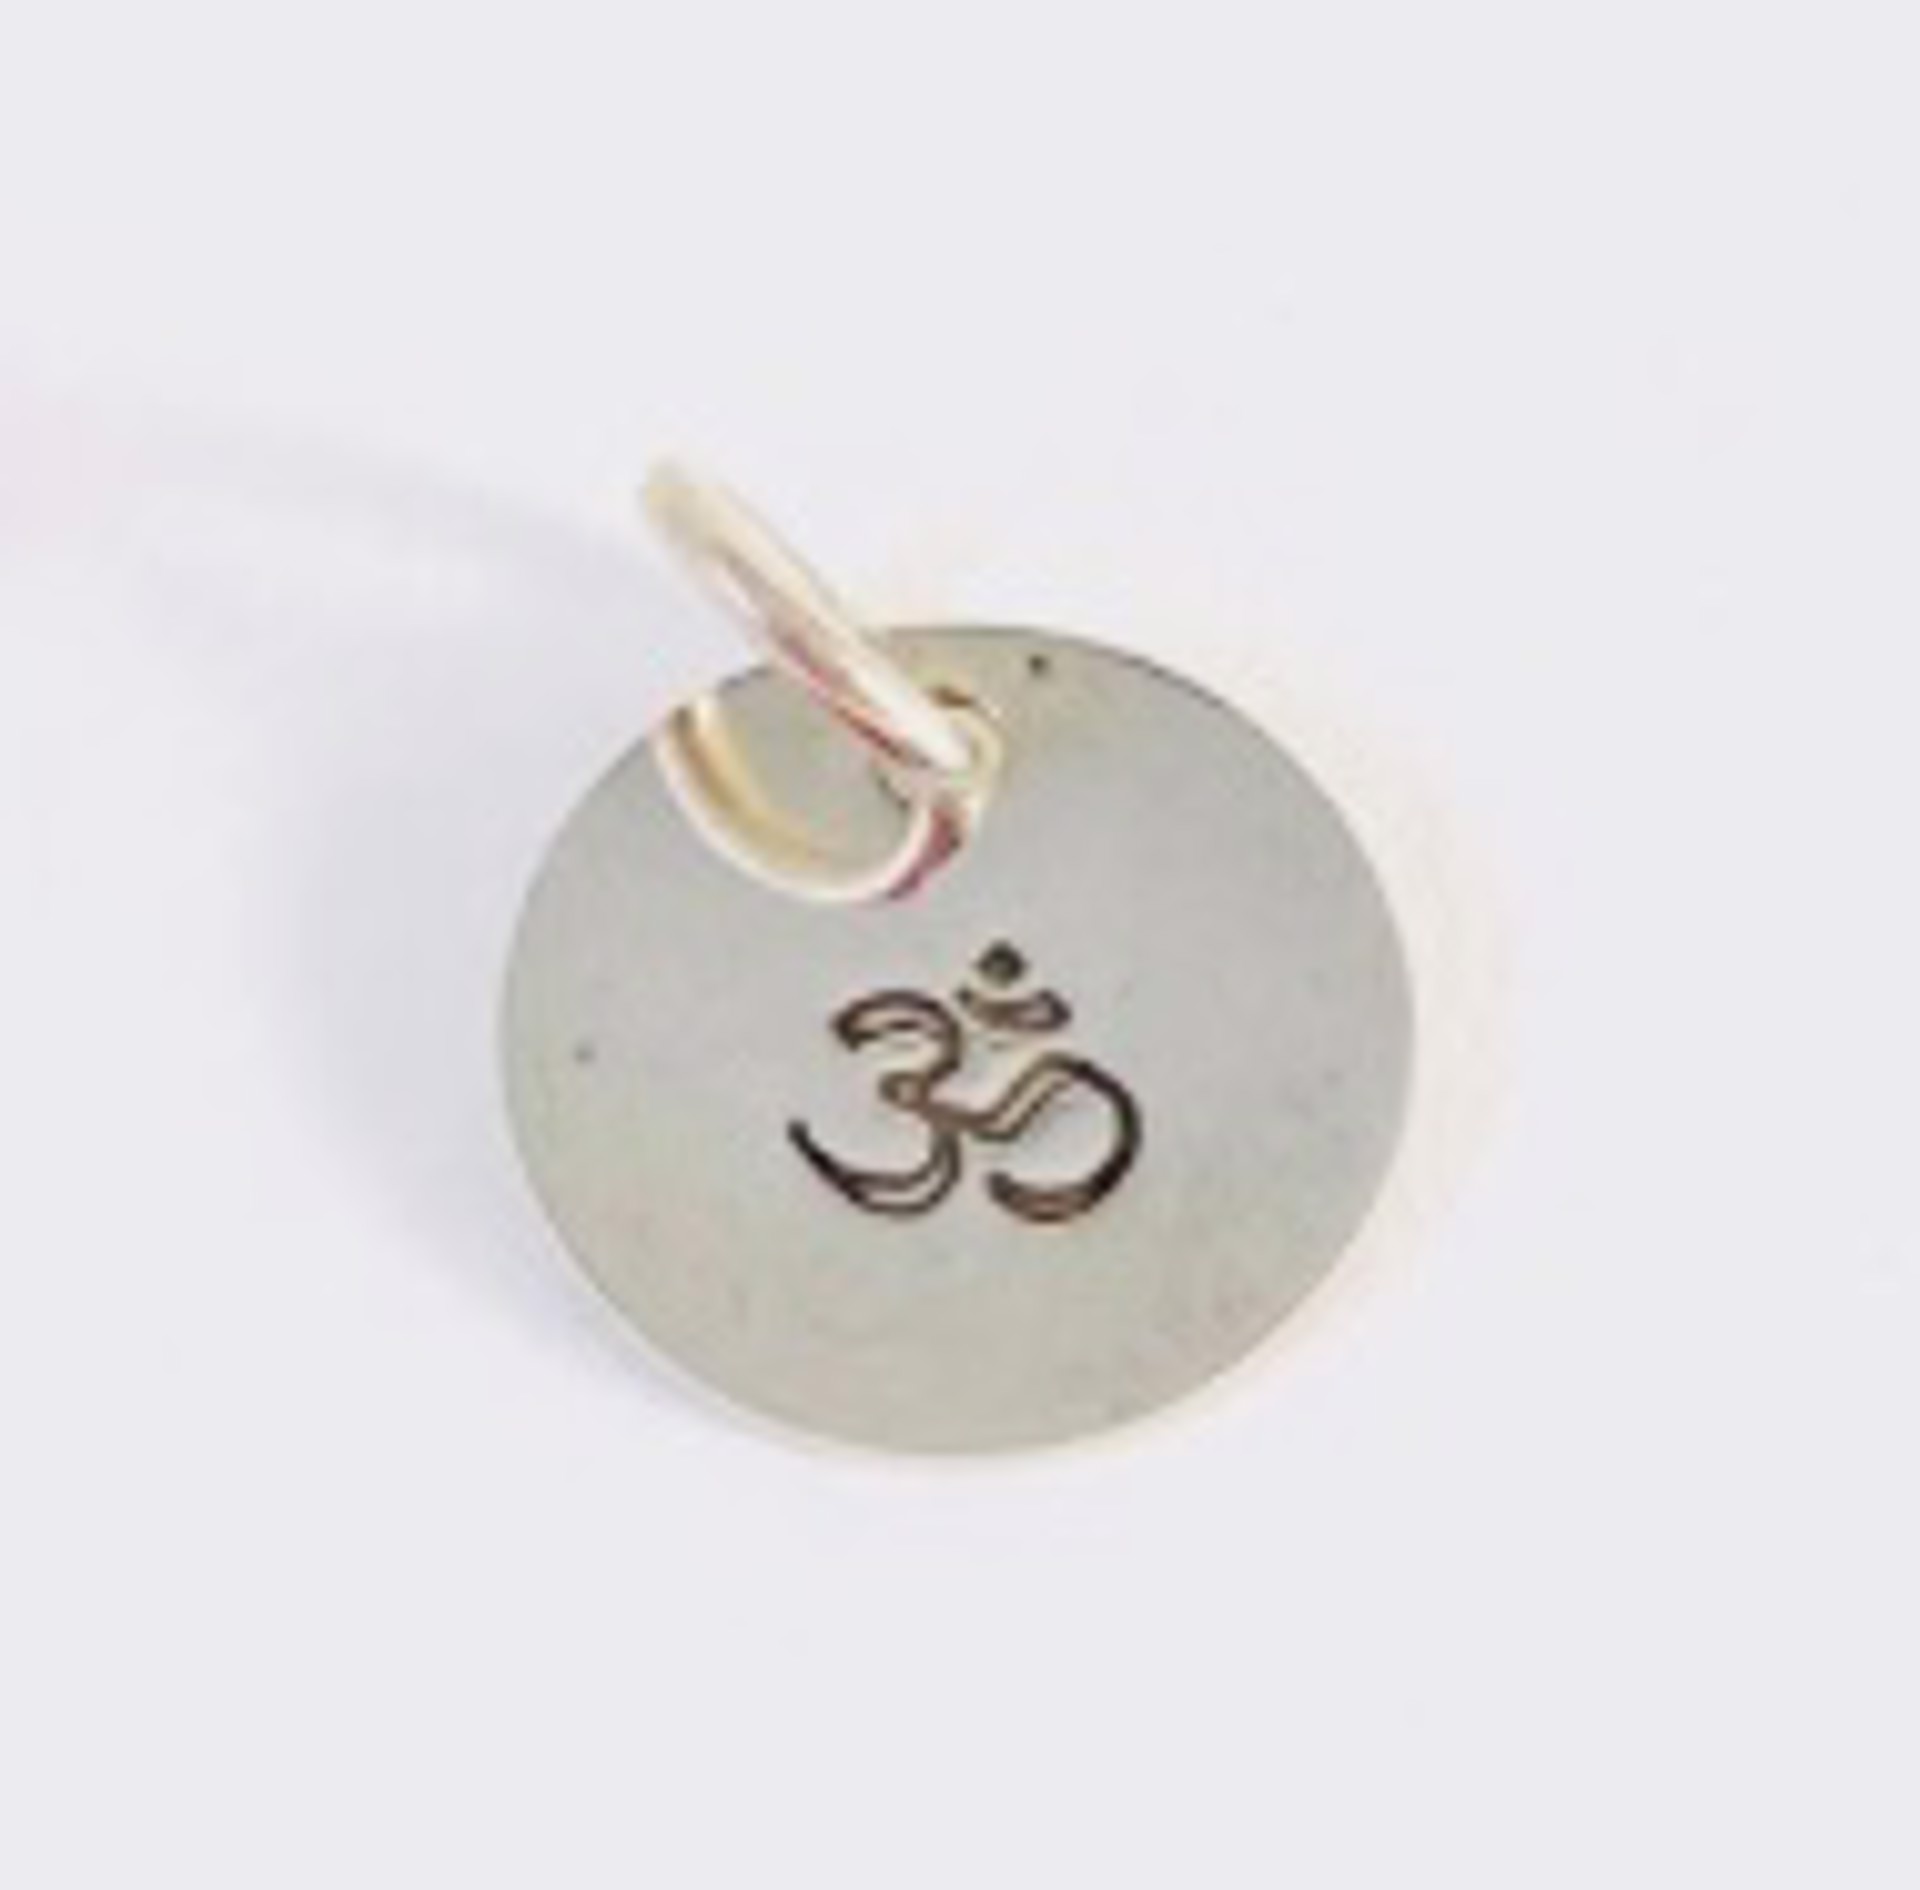 Ohm Mini Pendant by Shelby Lee - jewelry